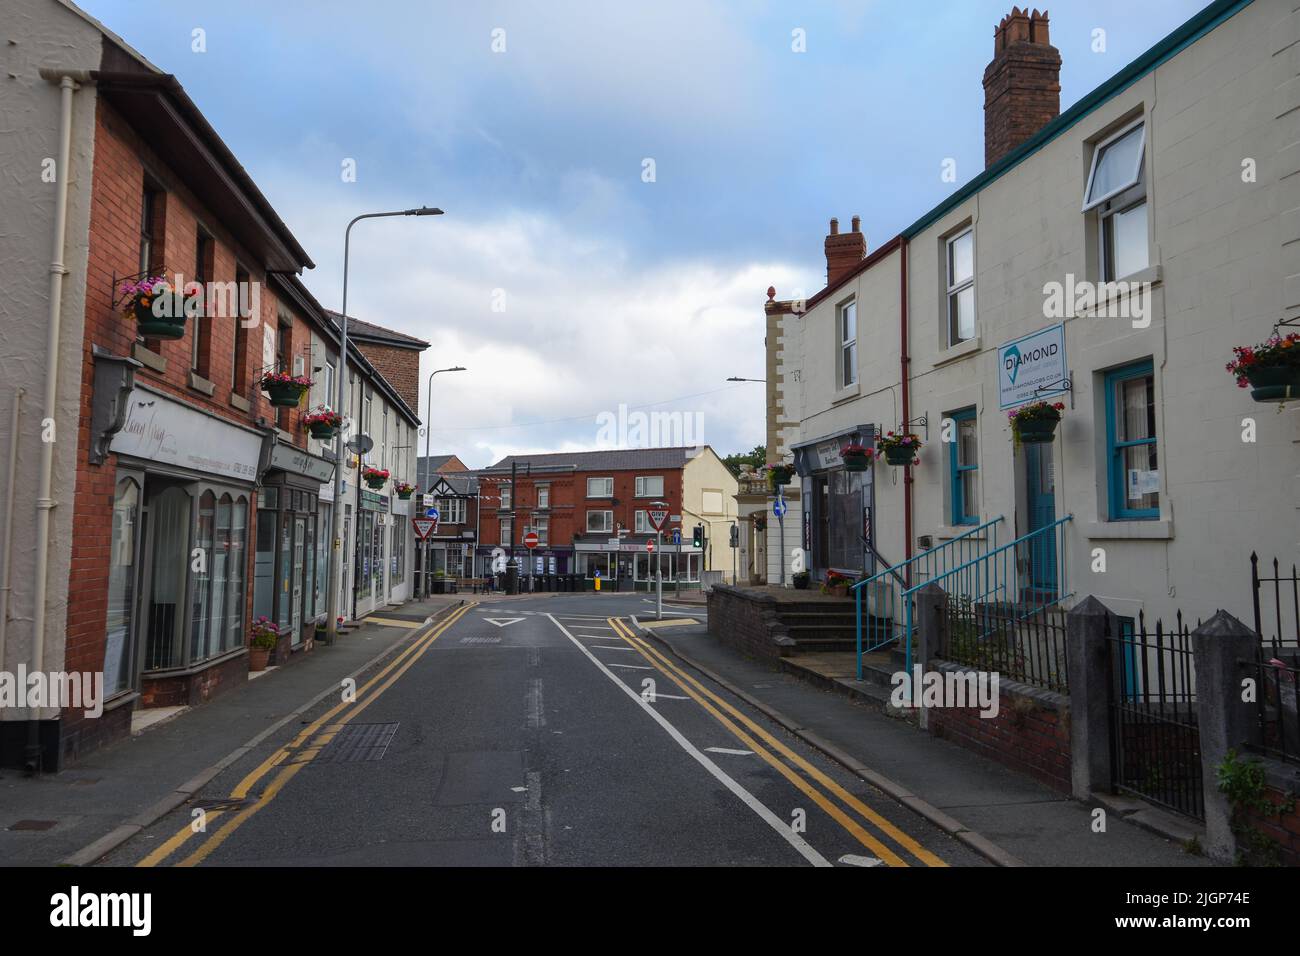 Holywell, UK: Jun 19, 2022: A general street scene view of Brynford Street, looking towards Victoria Place in the Welsh market town of Holywell, a pla Stock Photo